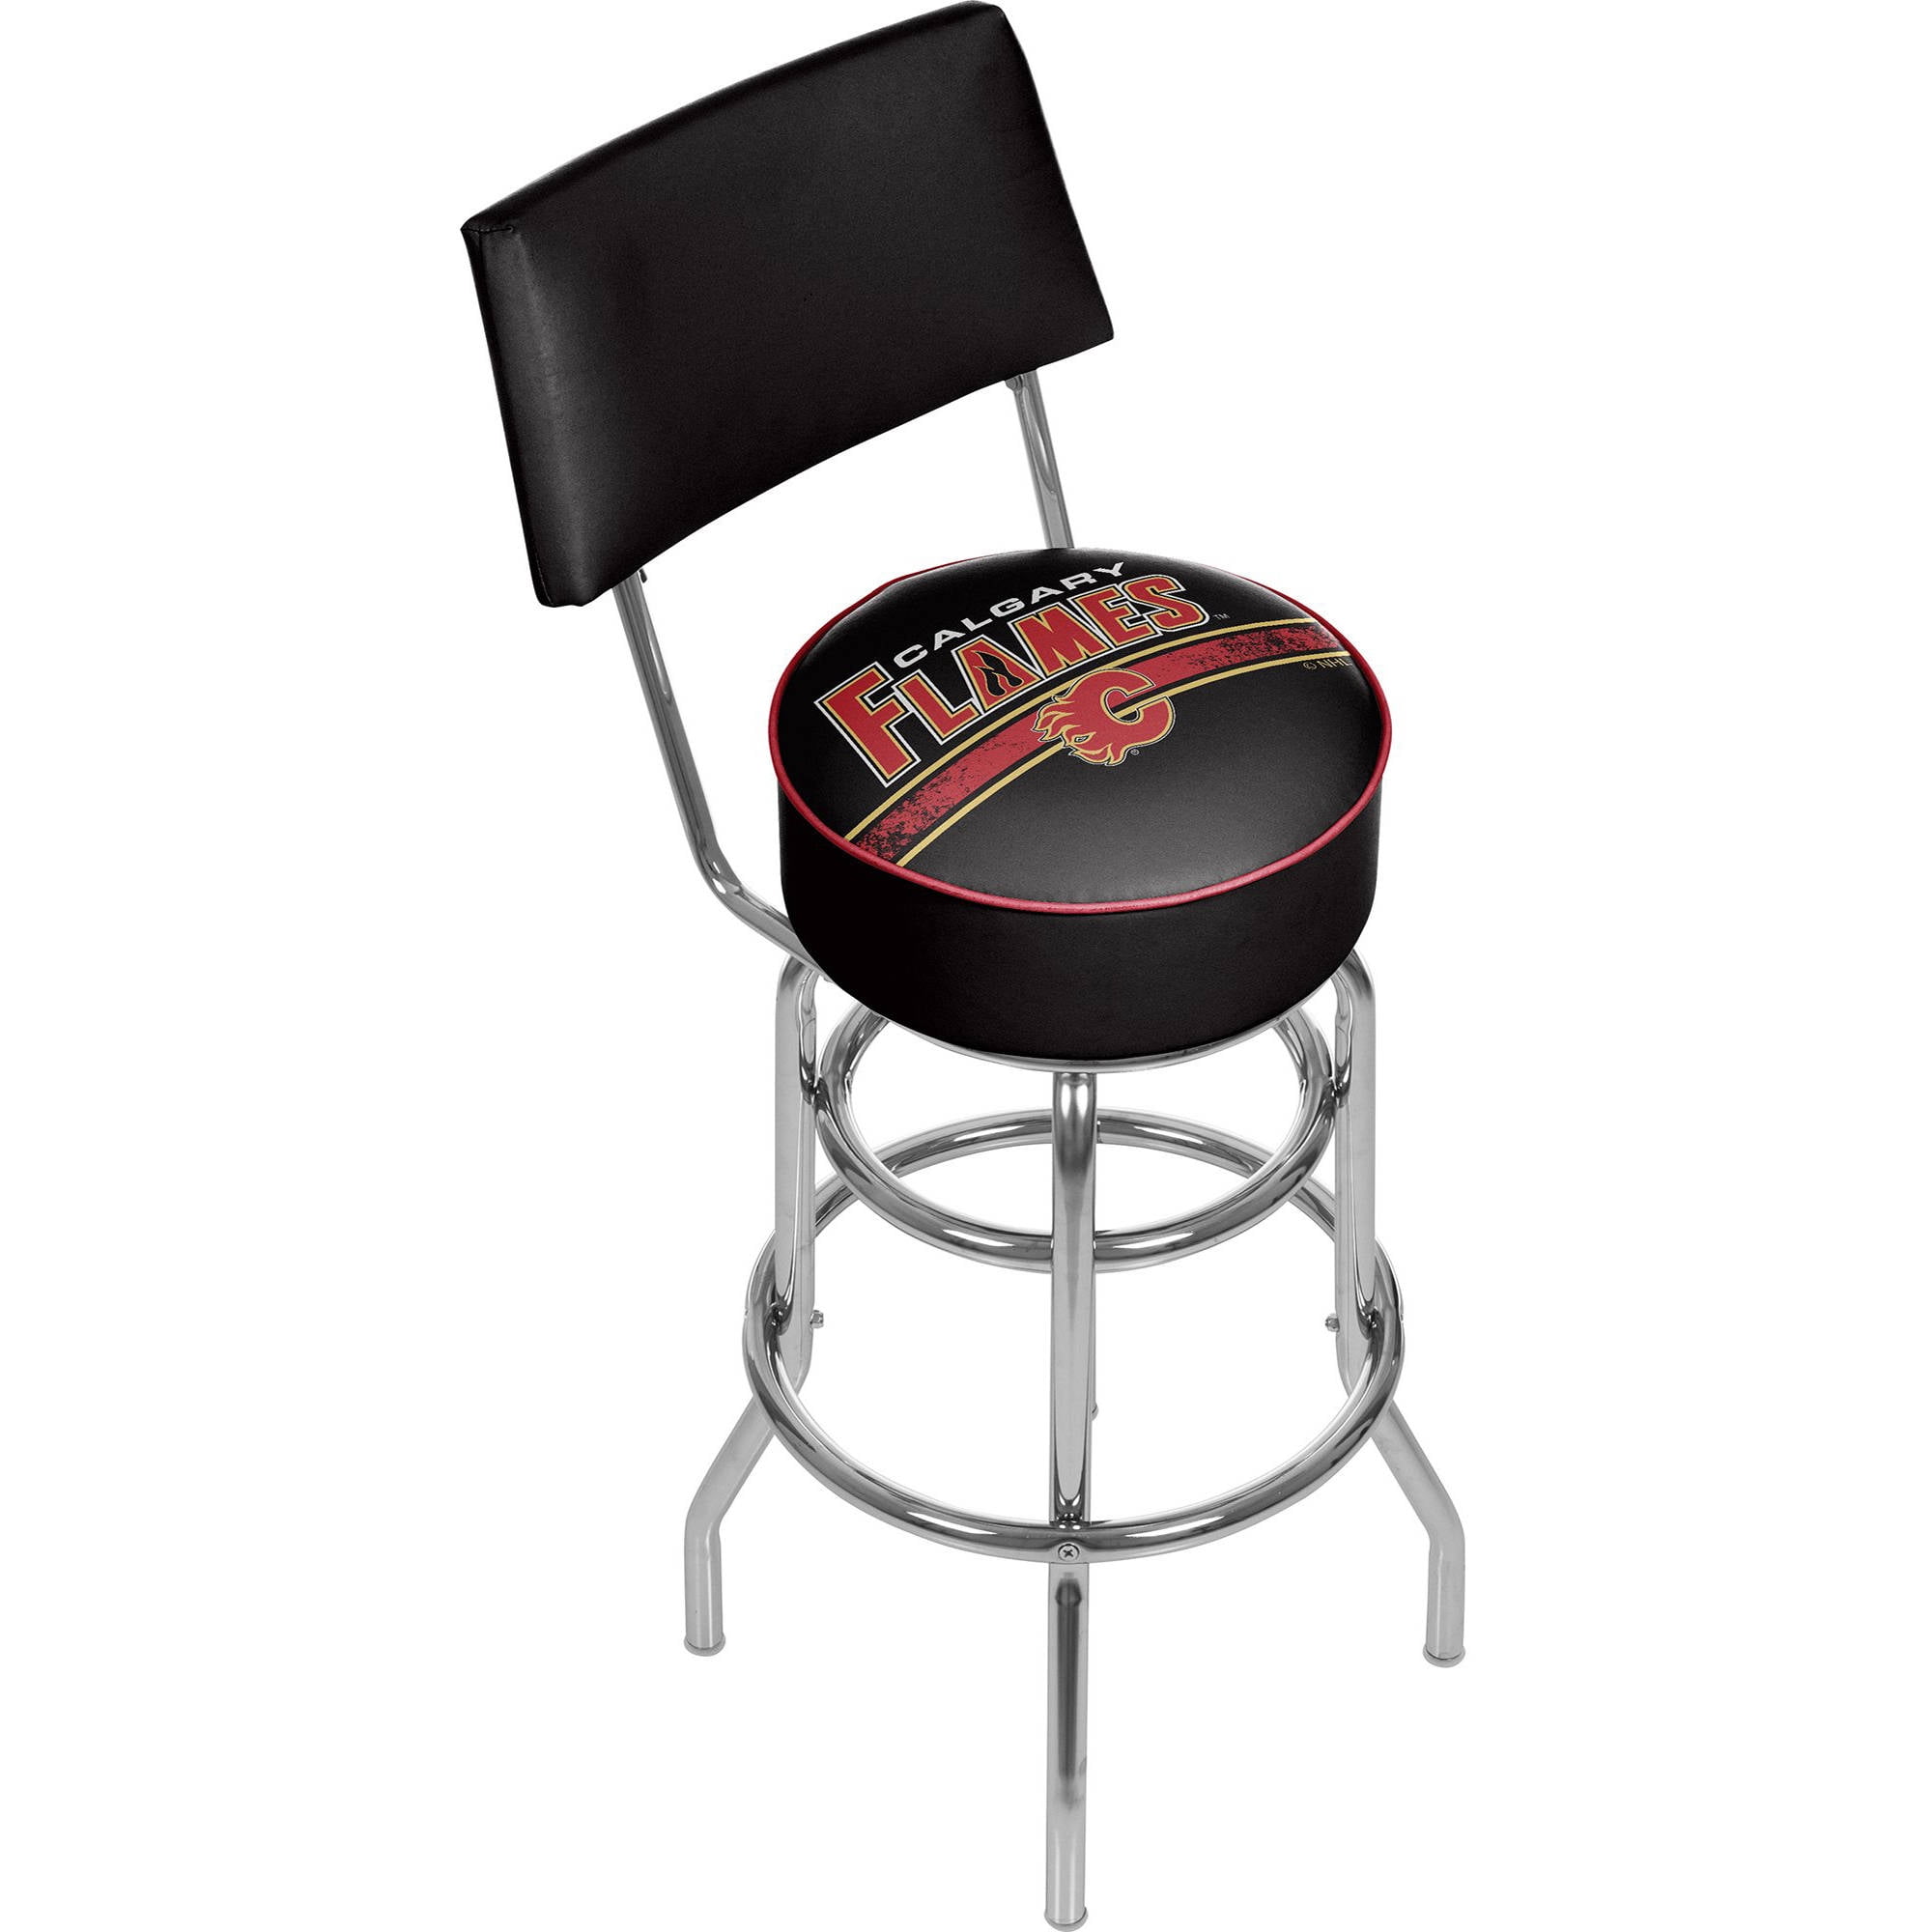 Pure Oil Swivel Bar Stool With Back, Swivel Bar Stools For Garage